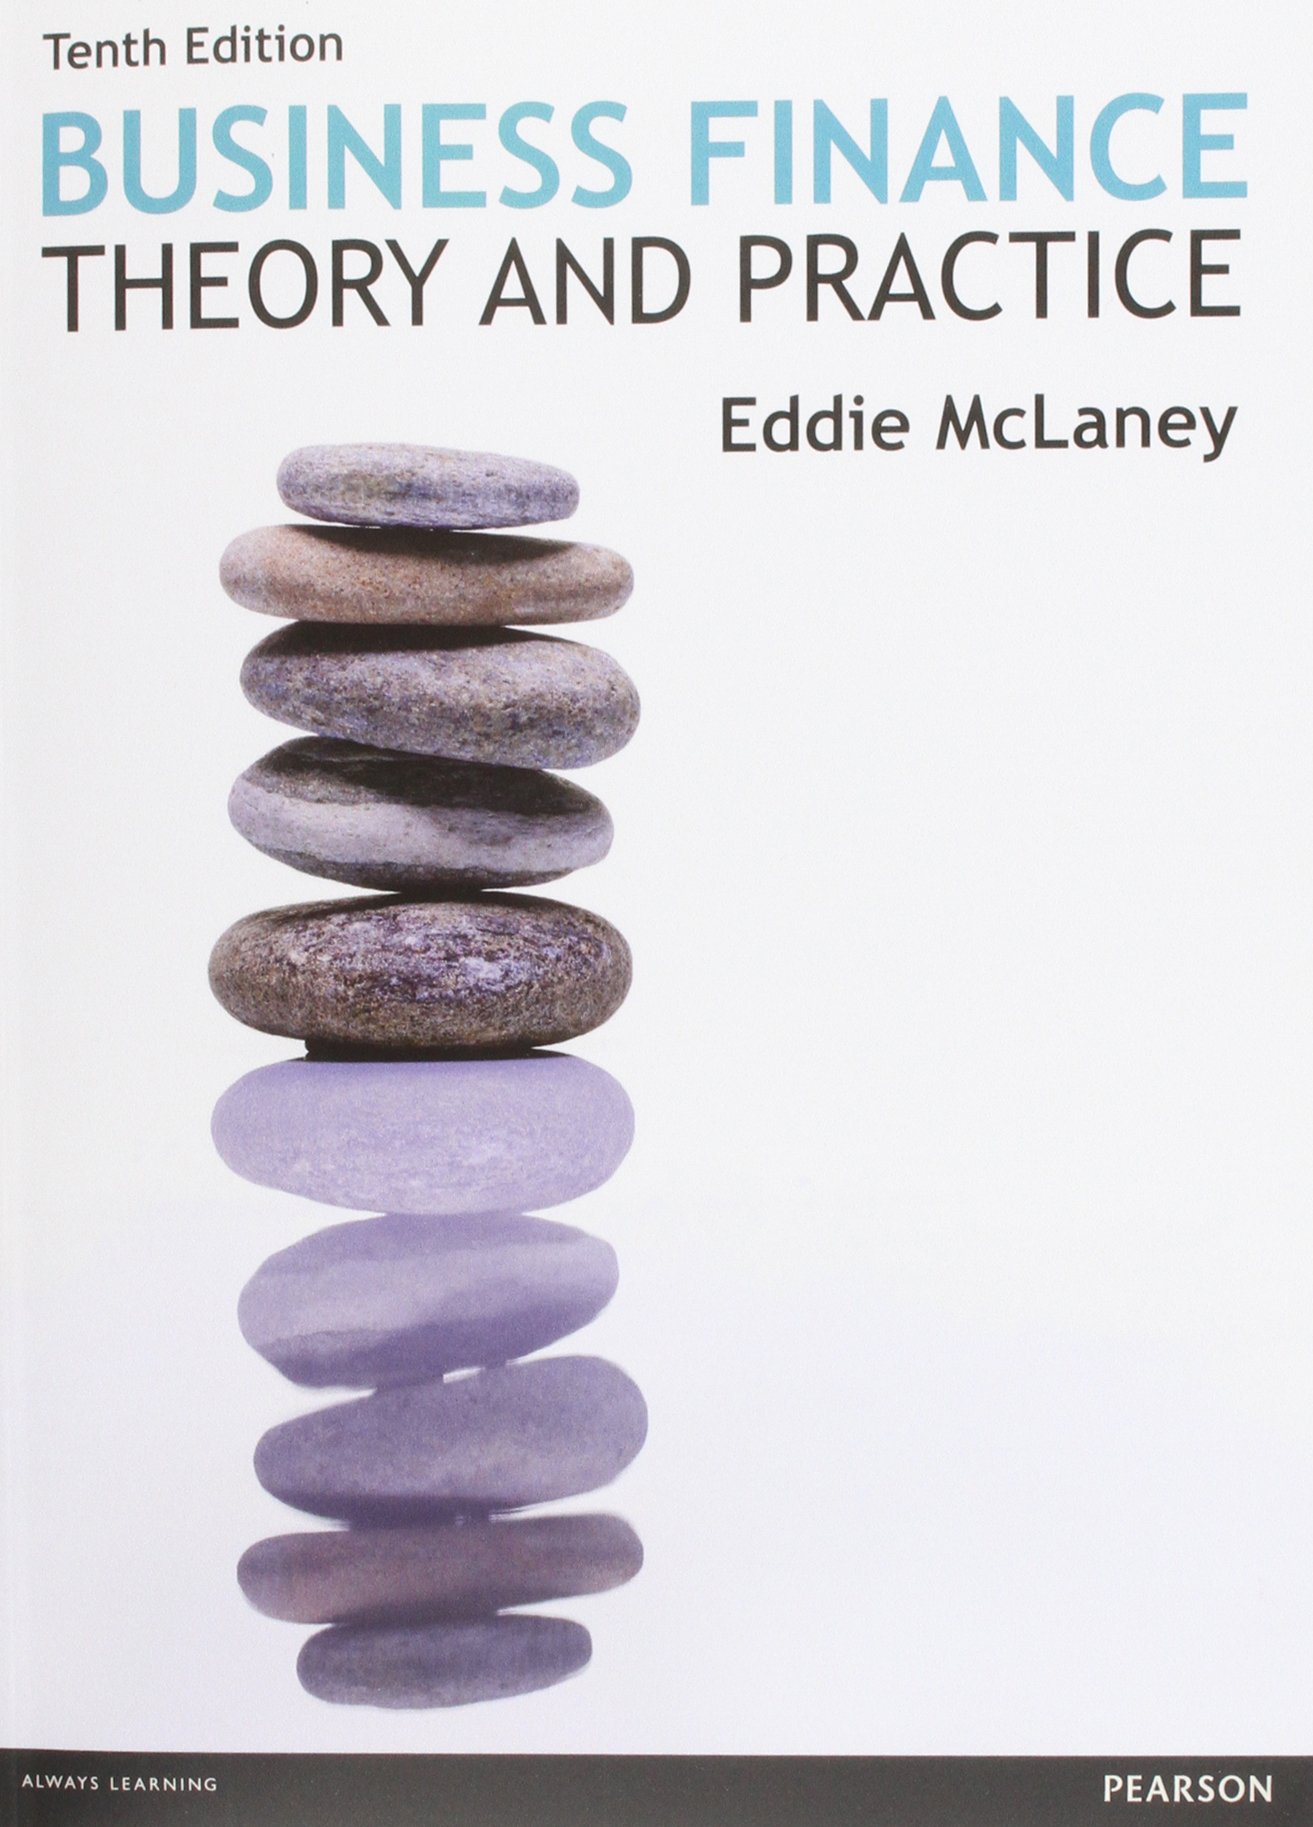 corporate finance theory and practice pdf